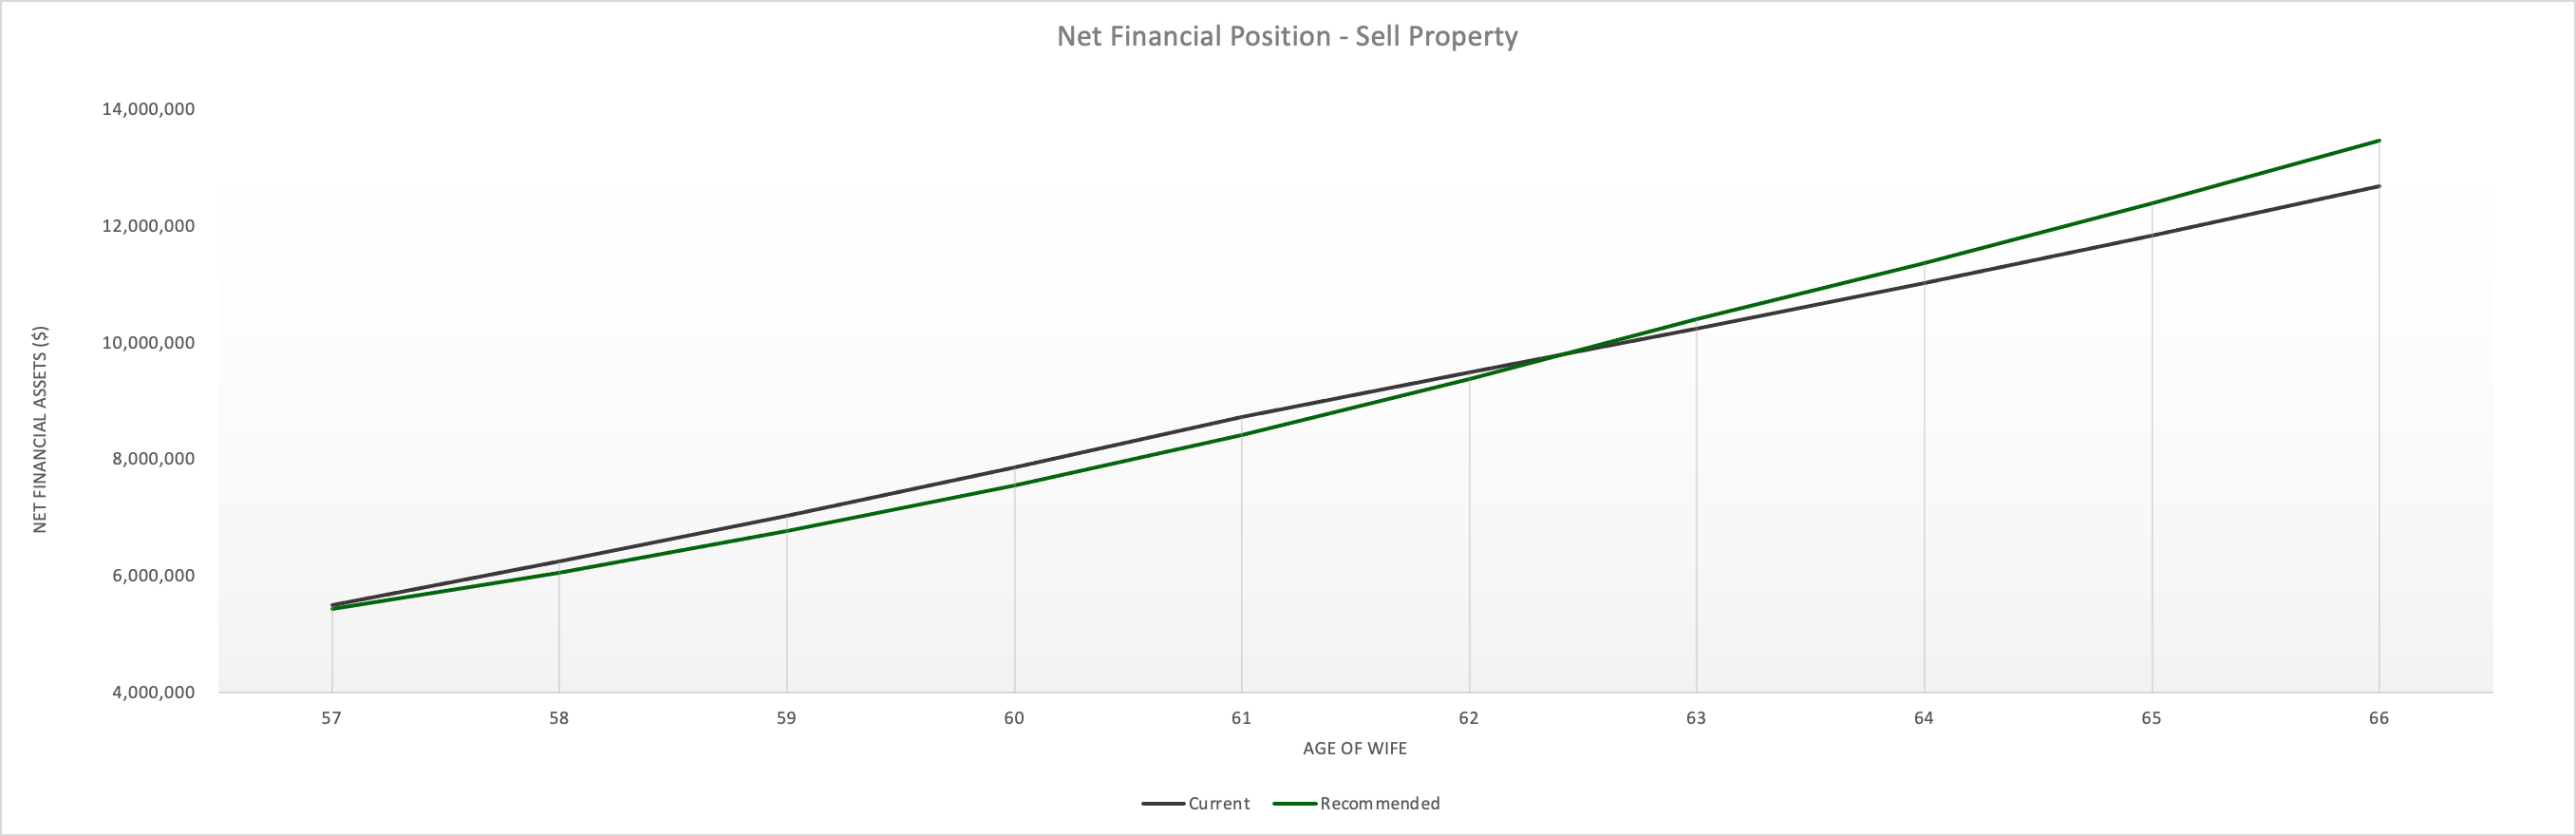 Net Financial Position - Sell Property